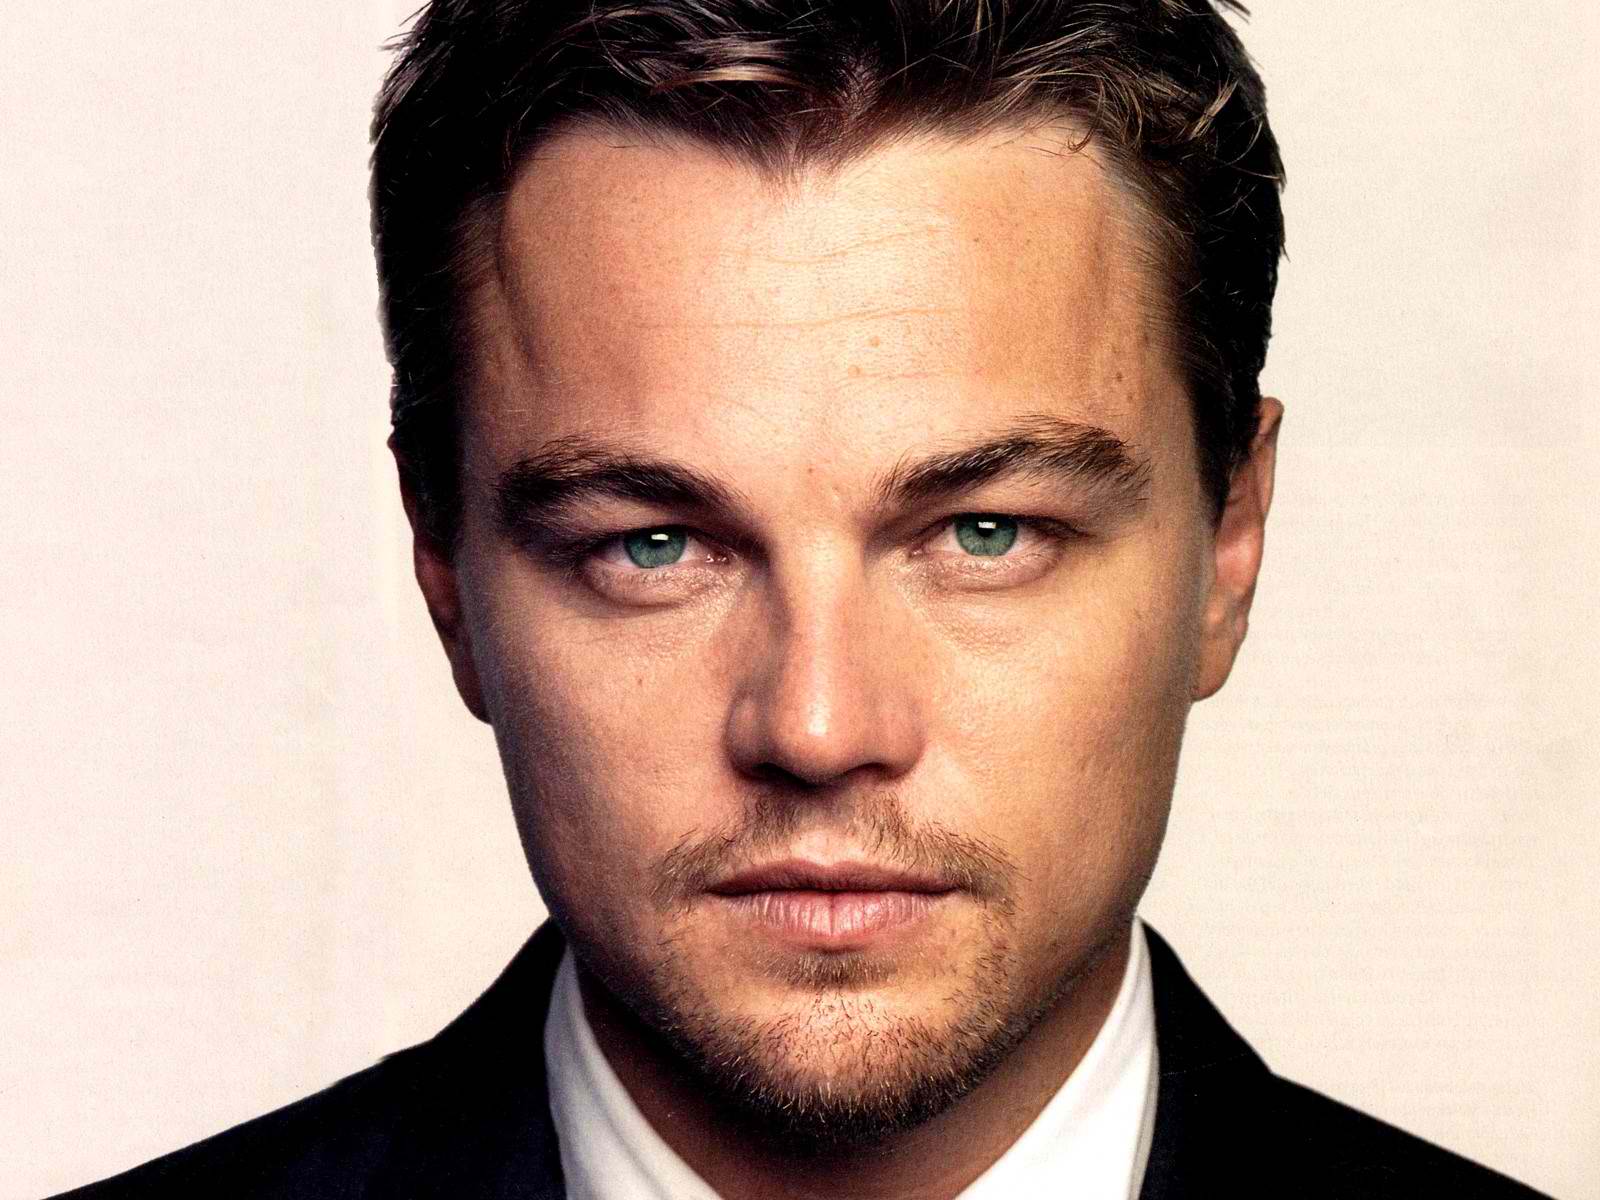 Hollywood actor DiCaprio plans break from Acting